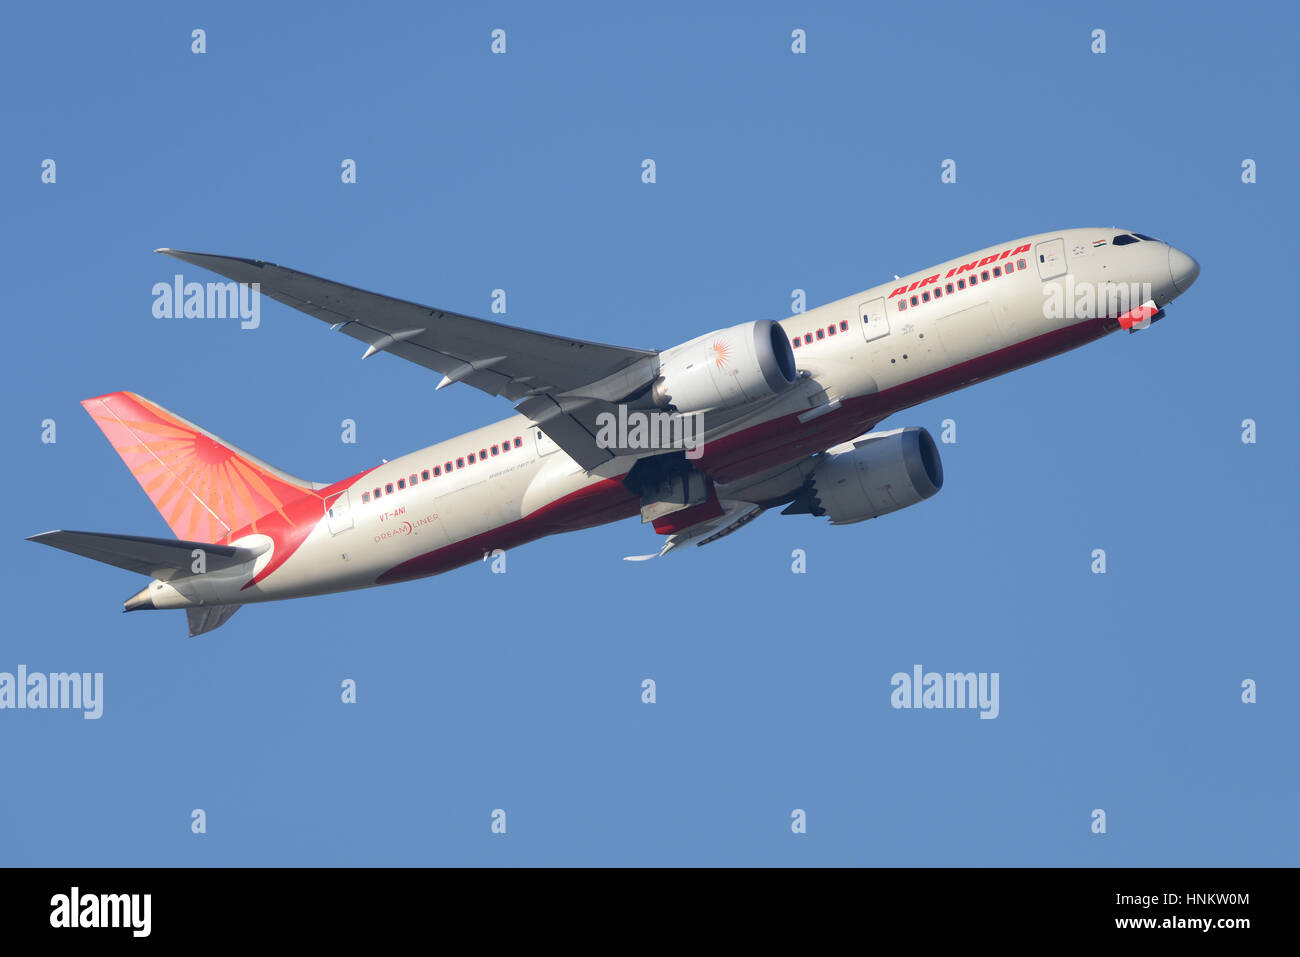 Air India Boeing 787-8 Dreamliner VT-ANI taking off from London Heathrow Airport in blue sky Stock Photo